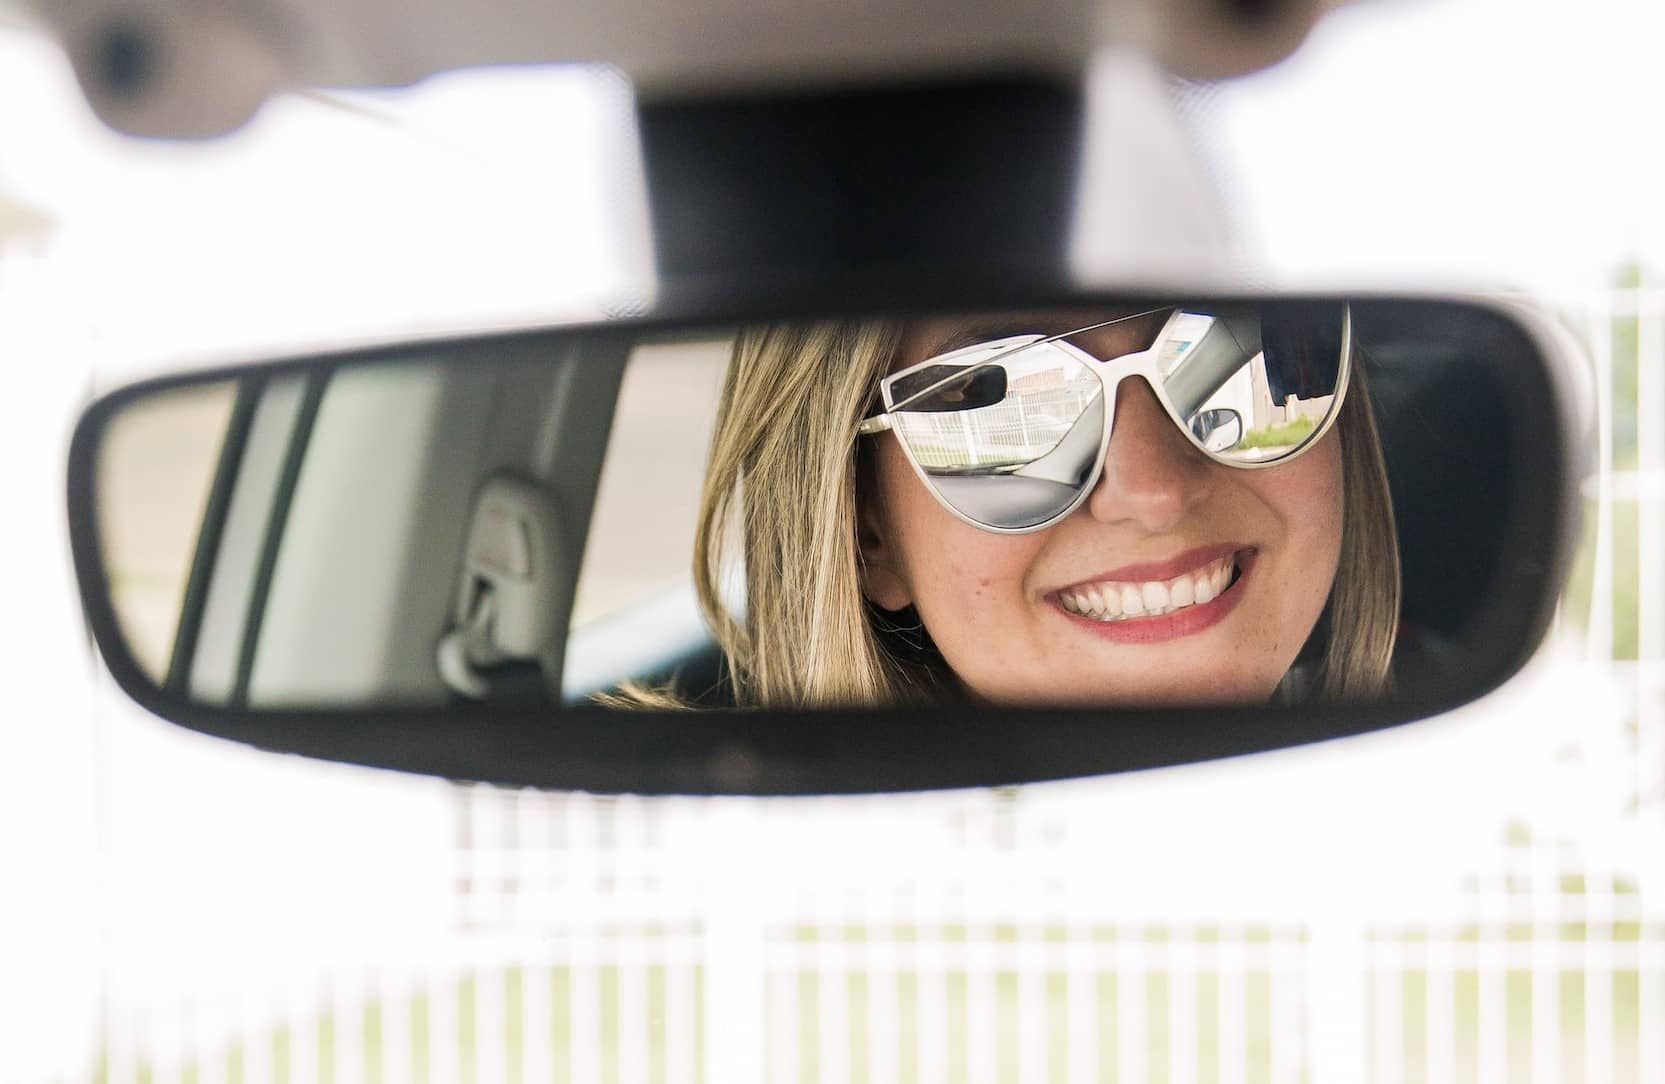 A woman wearing sunglasses in the rear view mirror of a car, plays a car themed game on her phone while waiting for her friend to get ready for a girls' beach trip